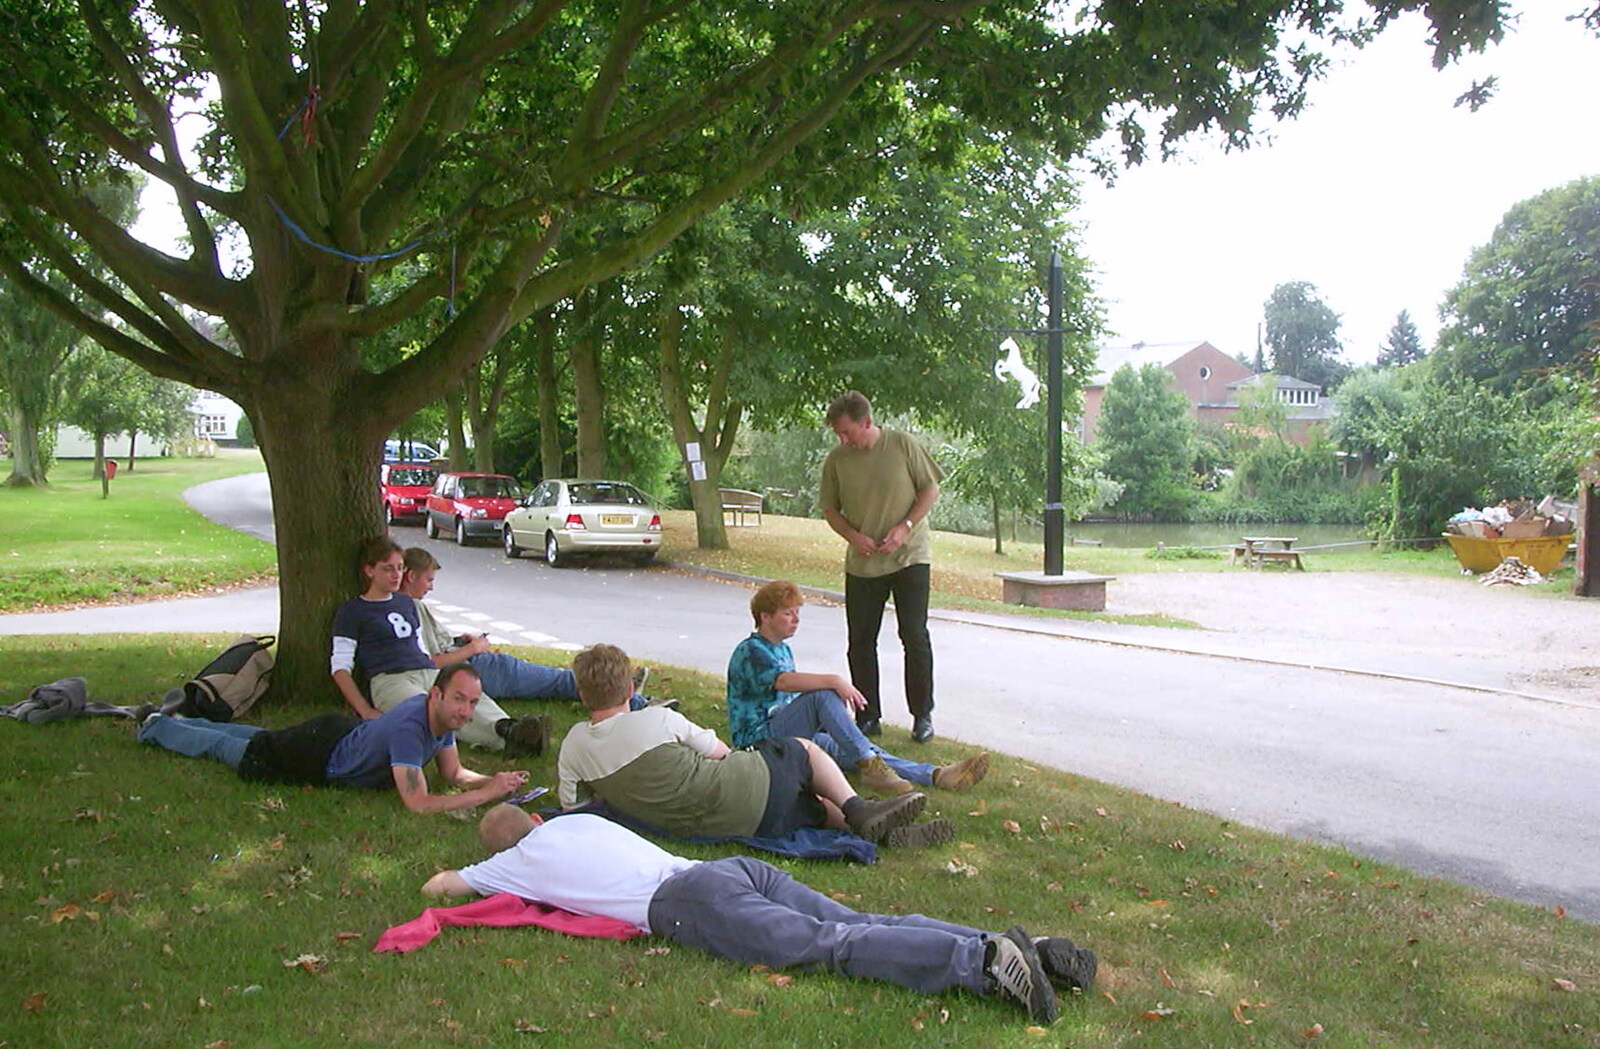 A BSCC Splinter Group Camping Weekend, Theberton, Suffolk - 11th August 2002: We wait around under a tree for the pub to open